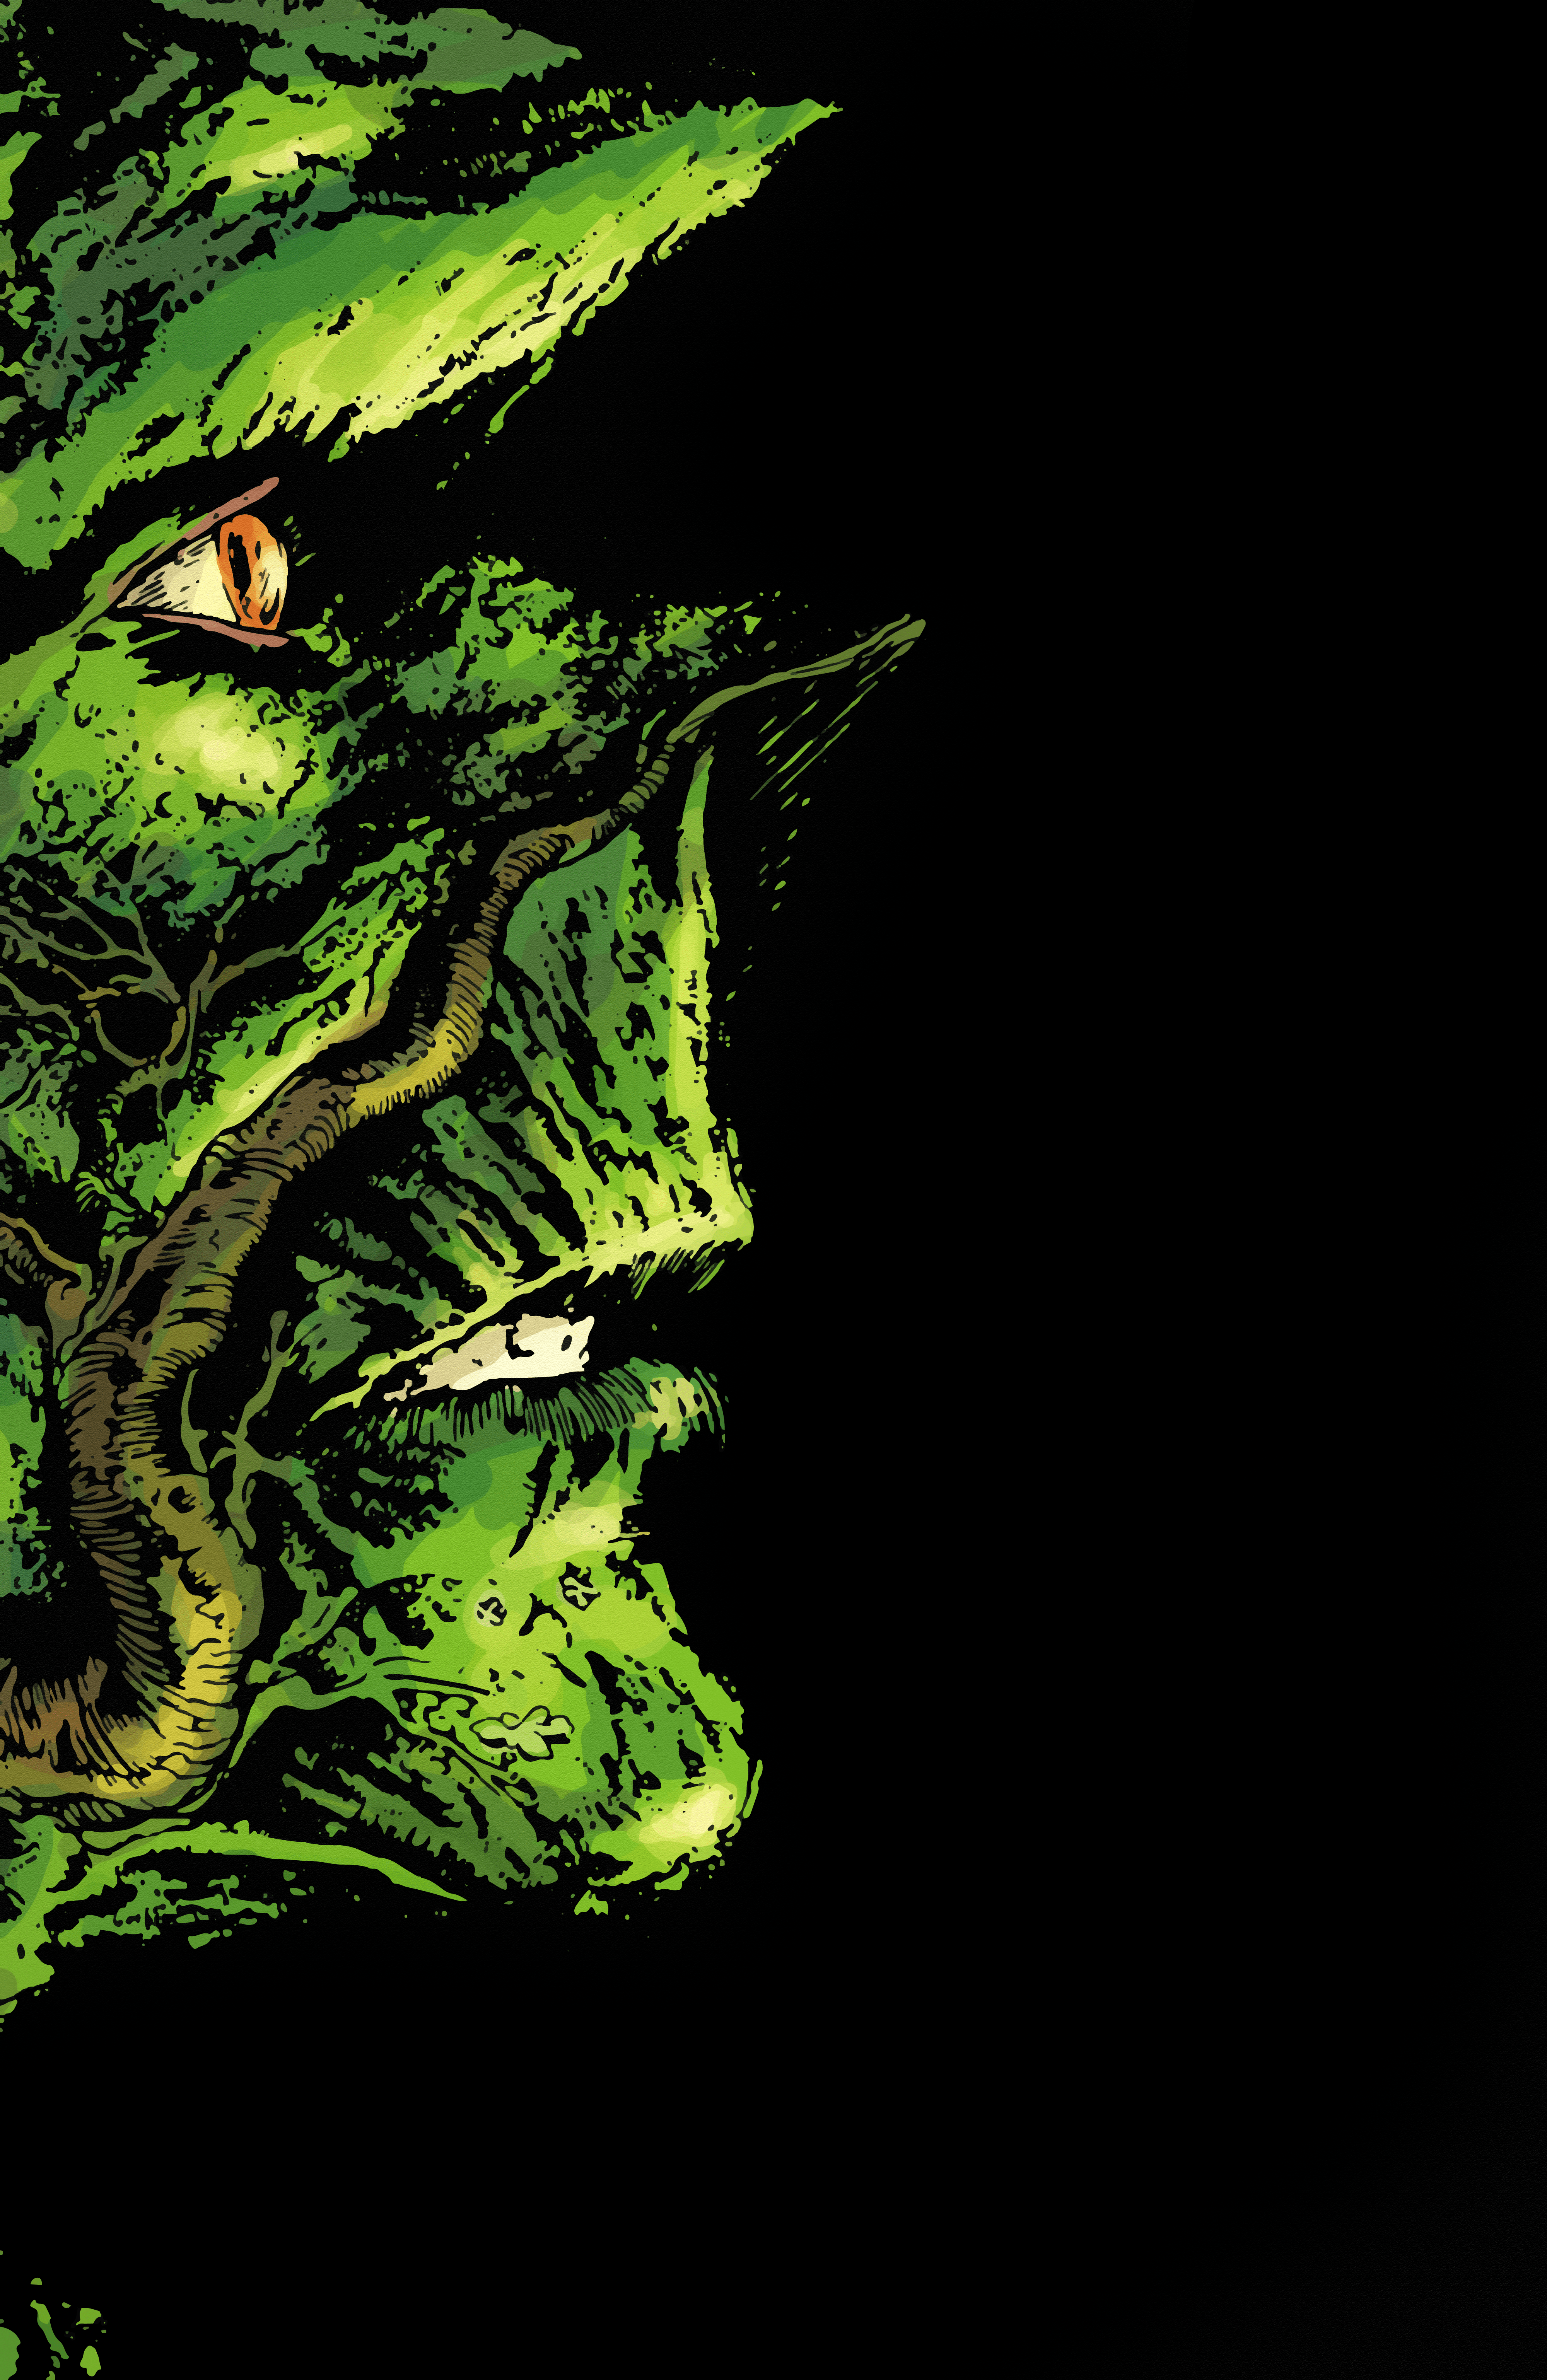 Wallpaper] Cover from Swamp Thing V.1 by Alan Moore and Stephen Bissette [Desktop cut in the comments]